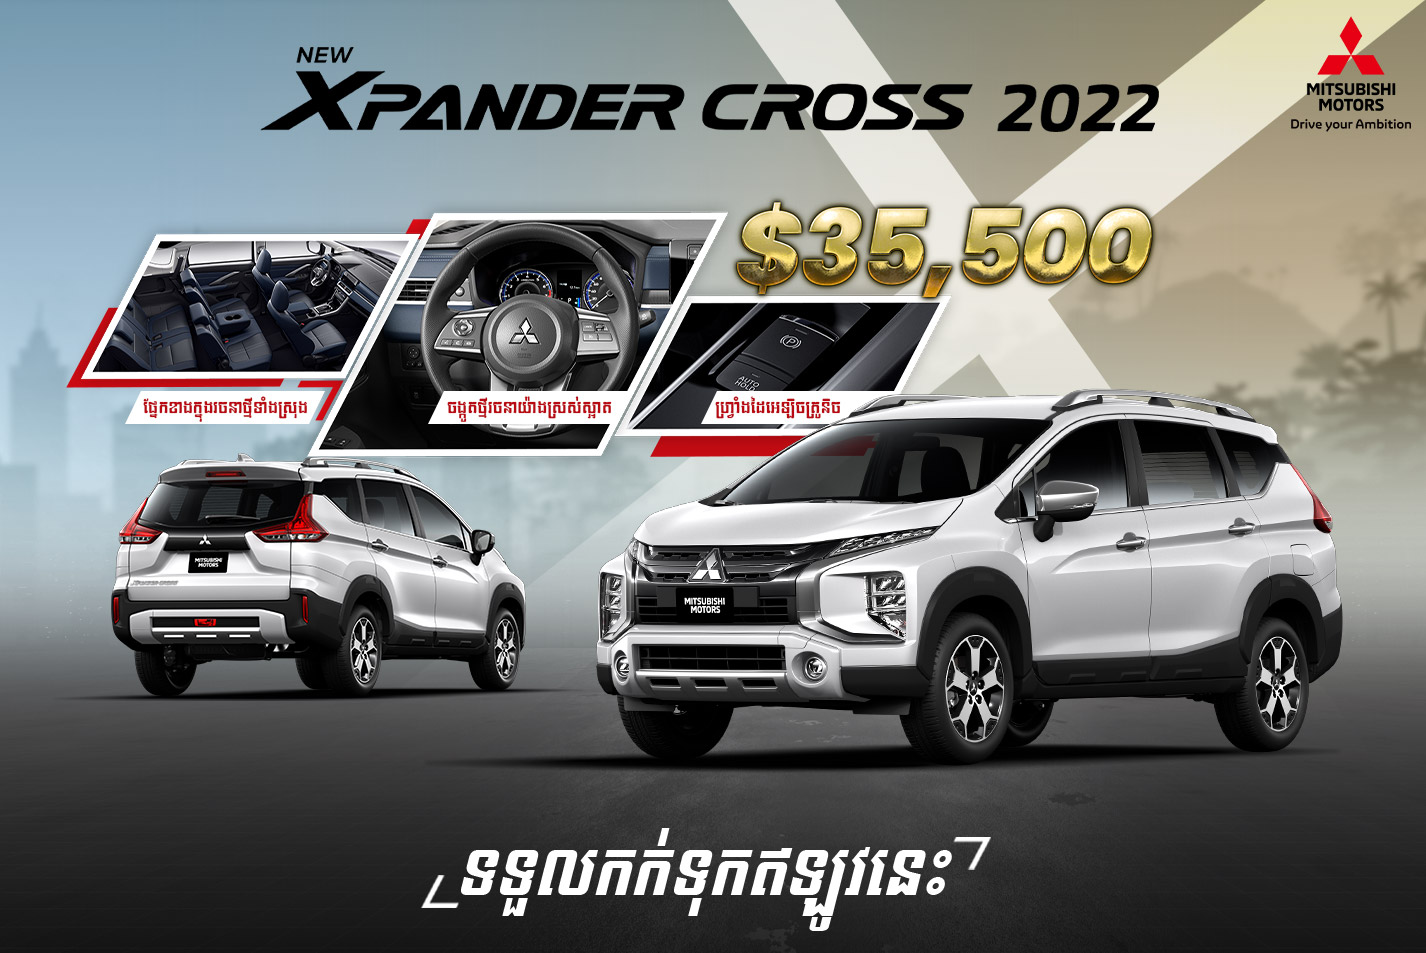 Xpander Cross 2022 is now open for pre-order!